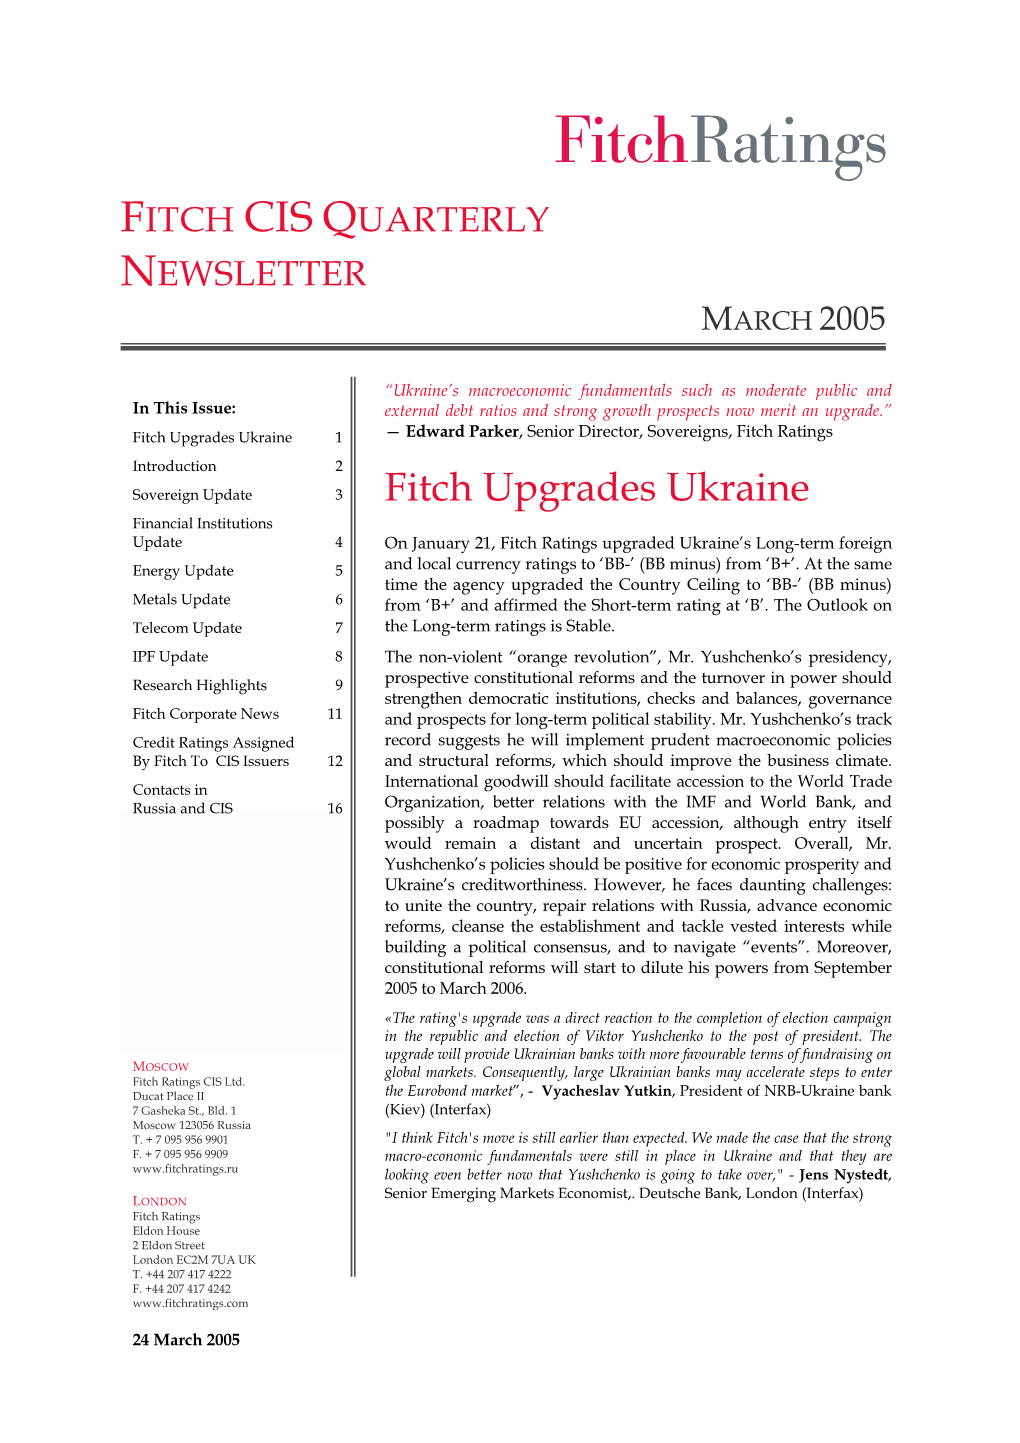 Fitch Upgrades Ukraine 1 — Edward Parker, Senior Director, Sovereigns, Fitch Ratings